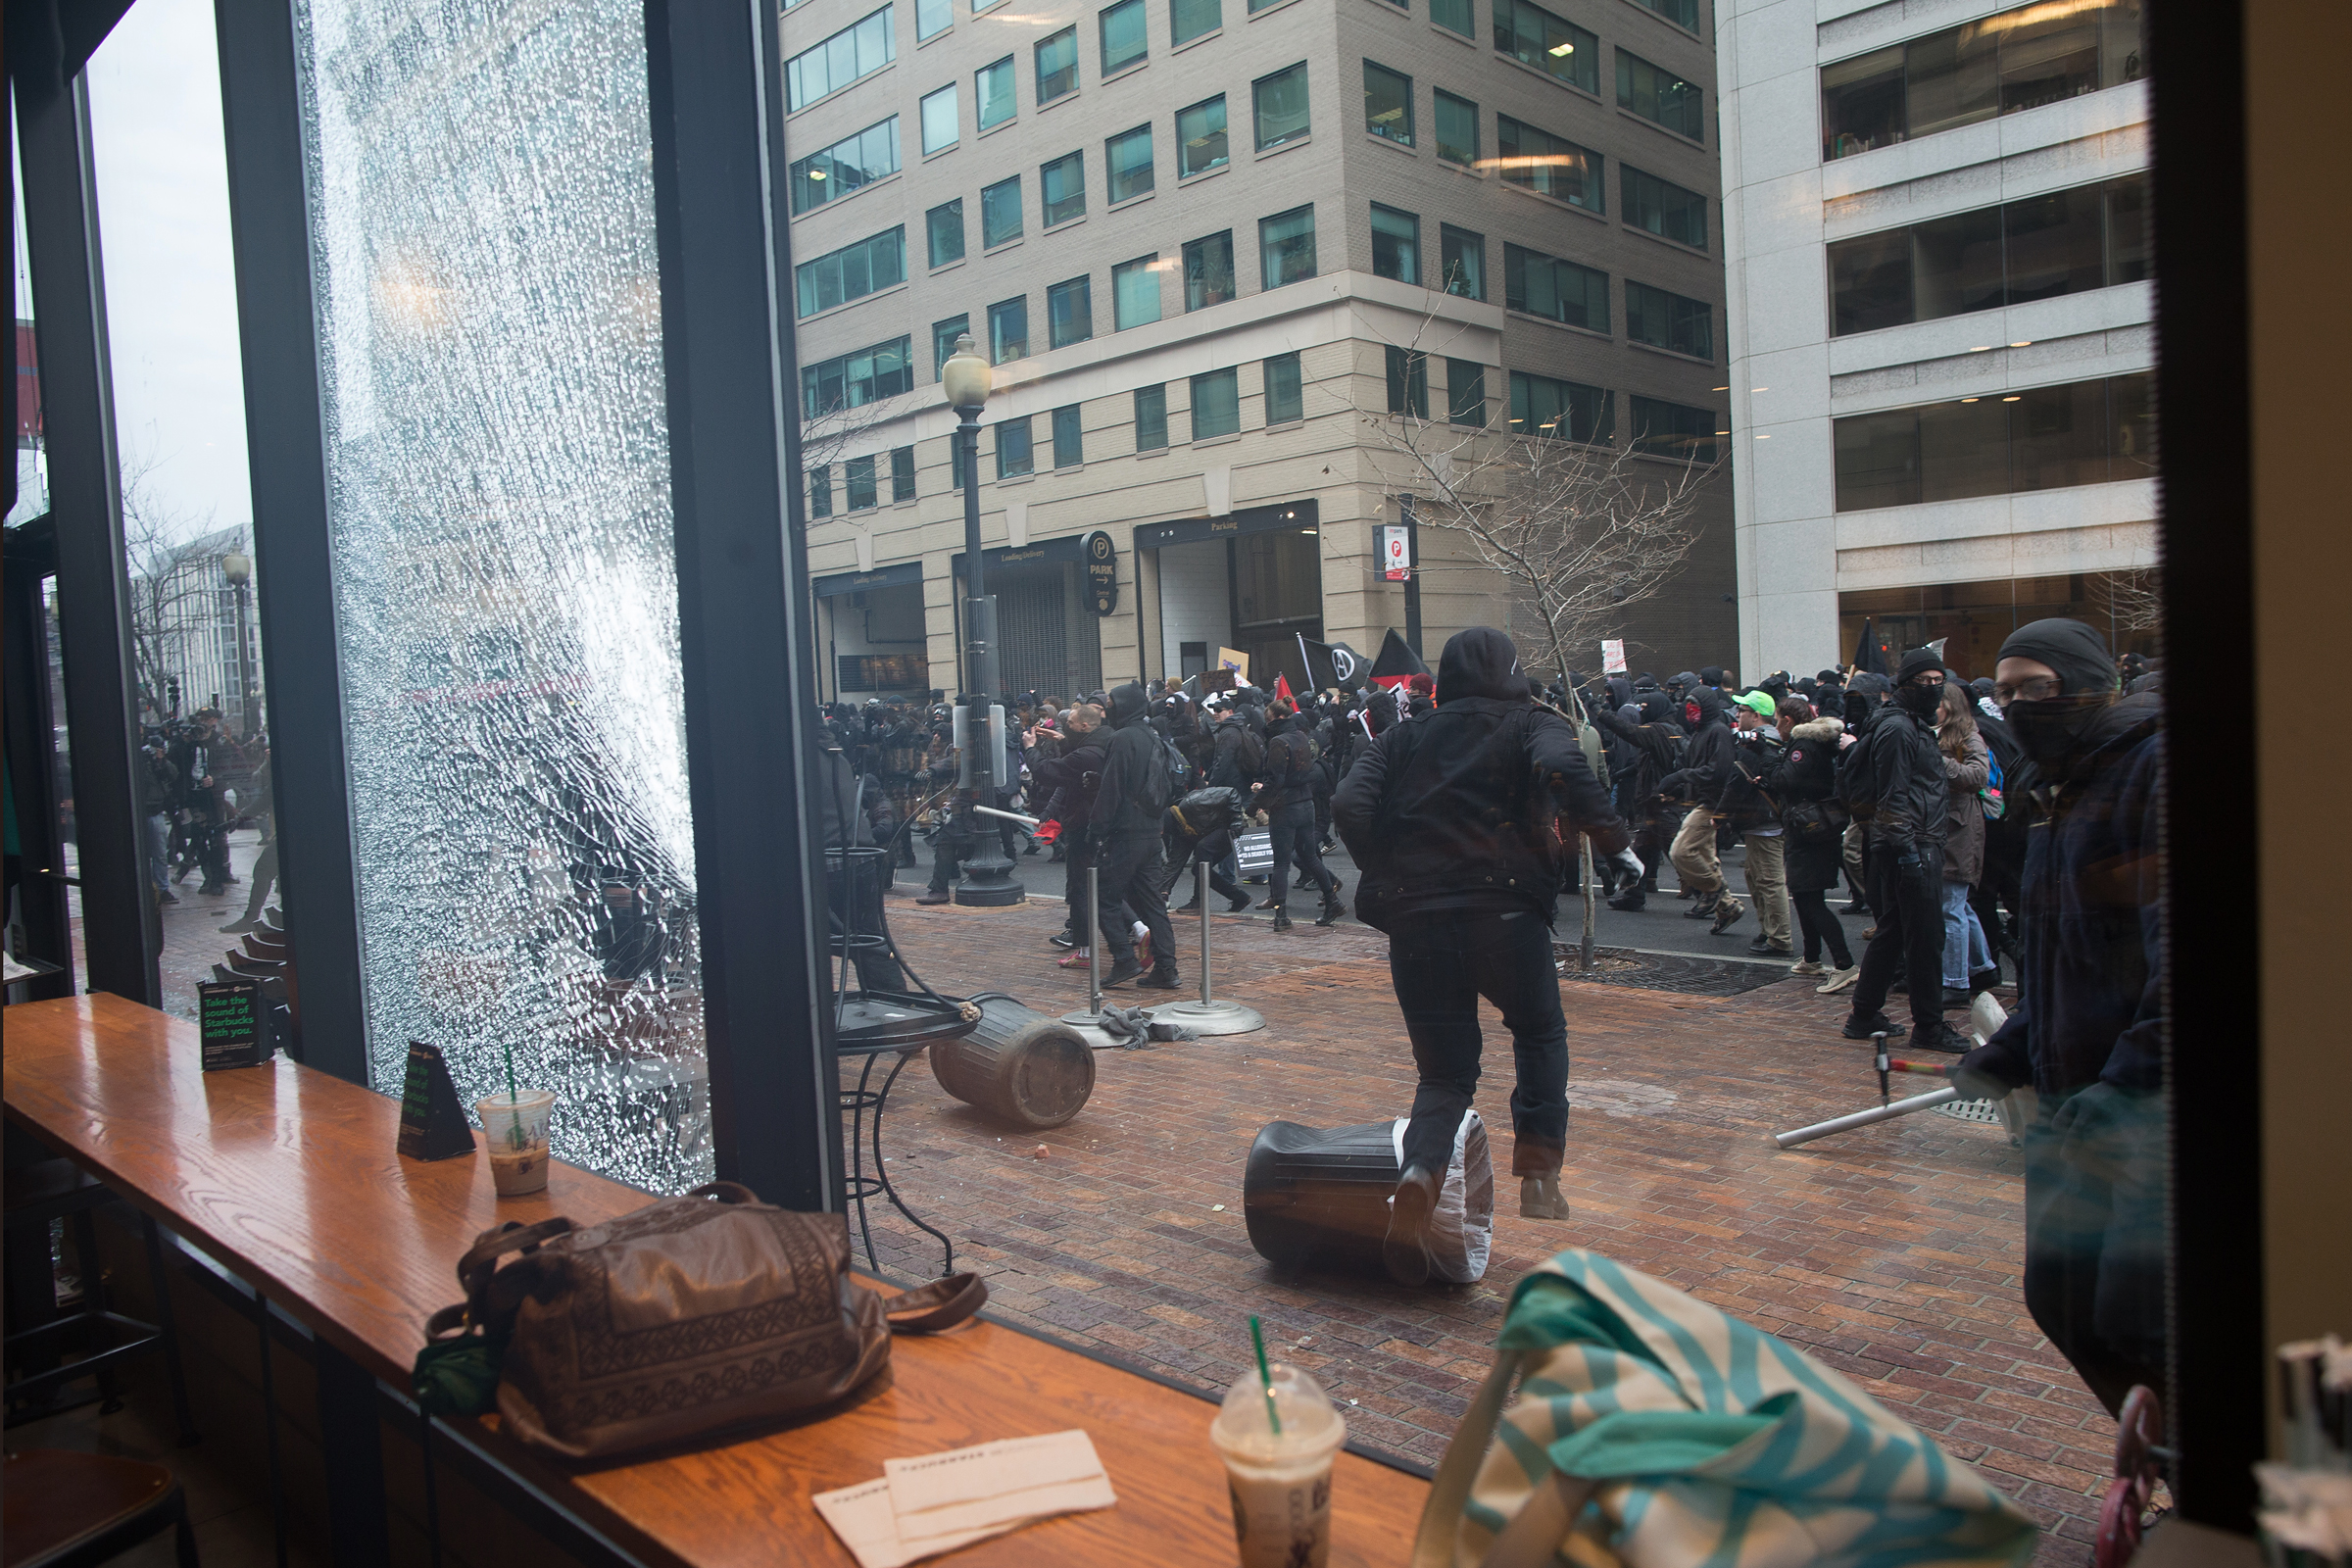 PHOTO: Anti Trump protestors hurled rocks and other debris at the Starbuck's Cafe window as they ran through the streets, on Jan. 20, 2017, in Washington.